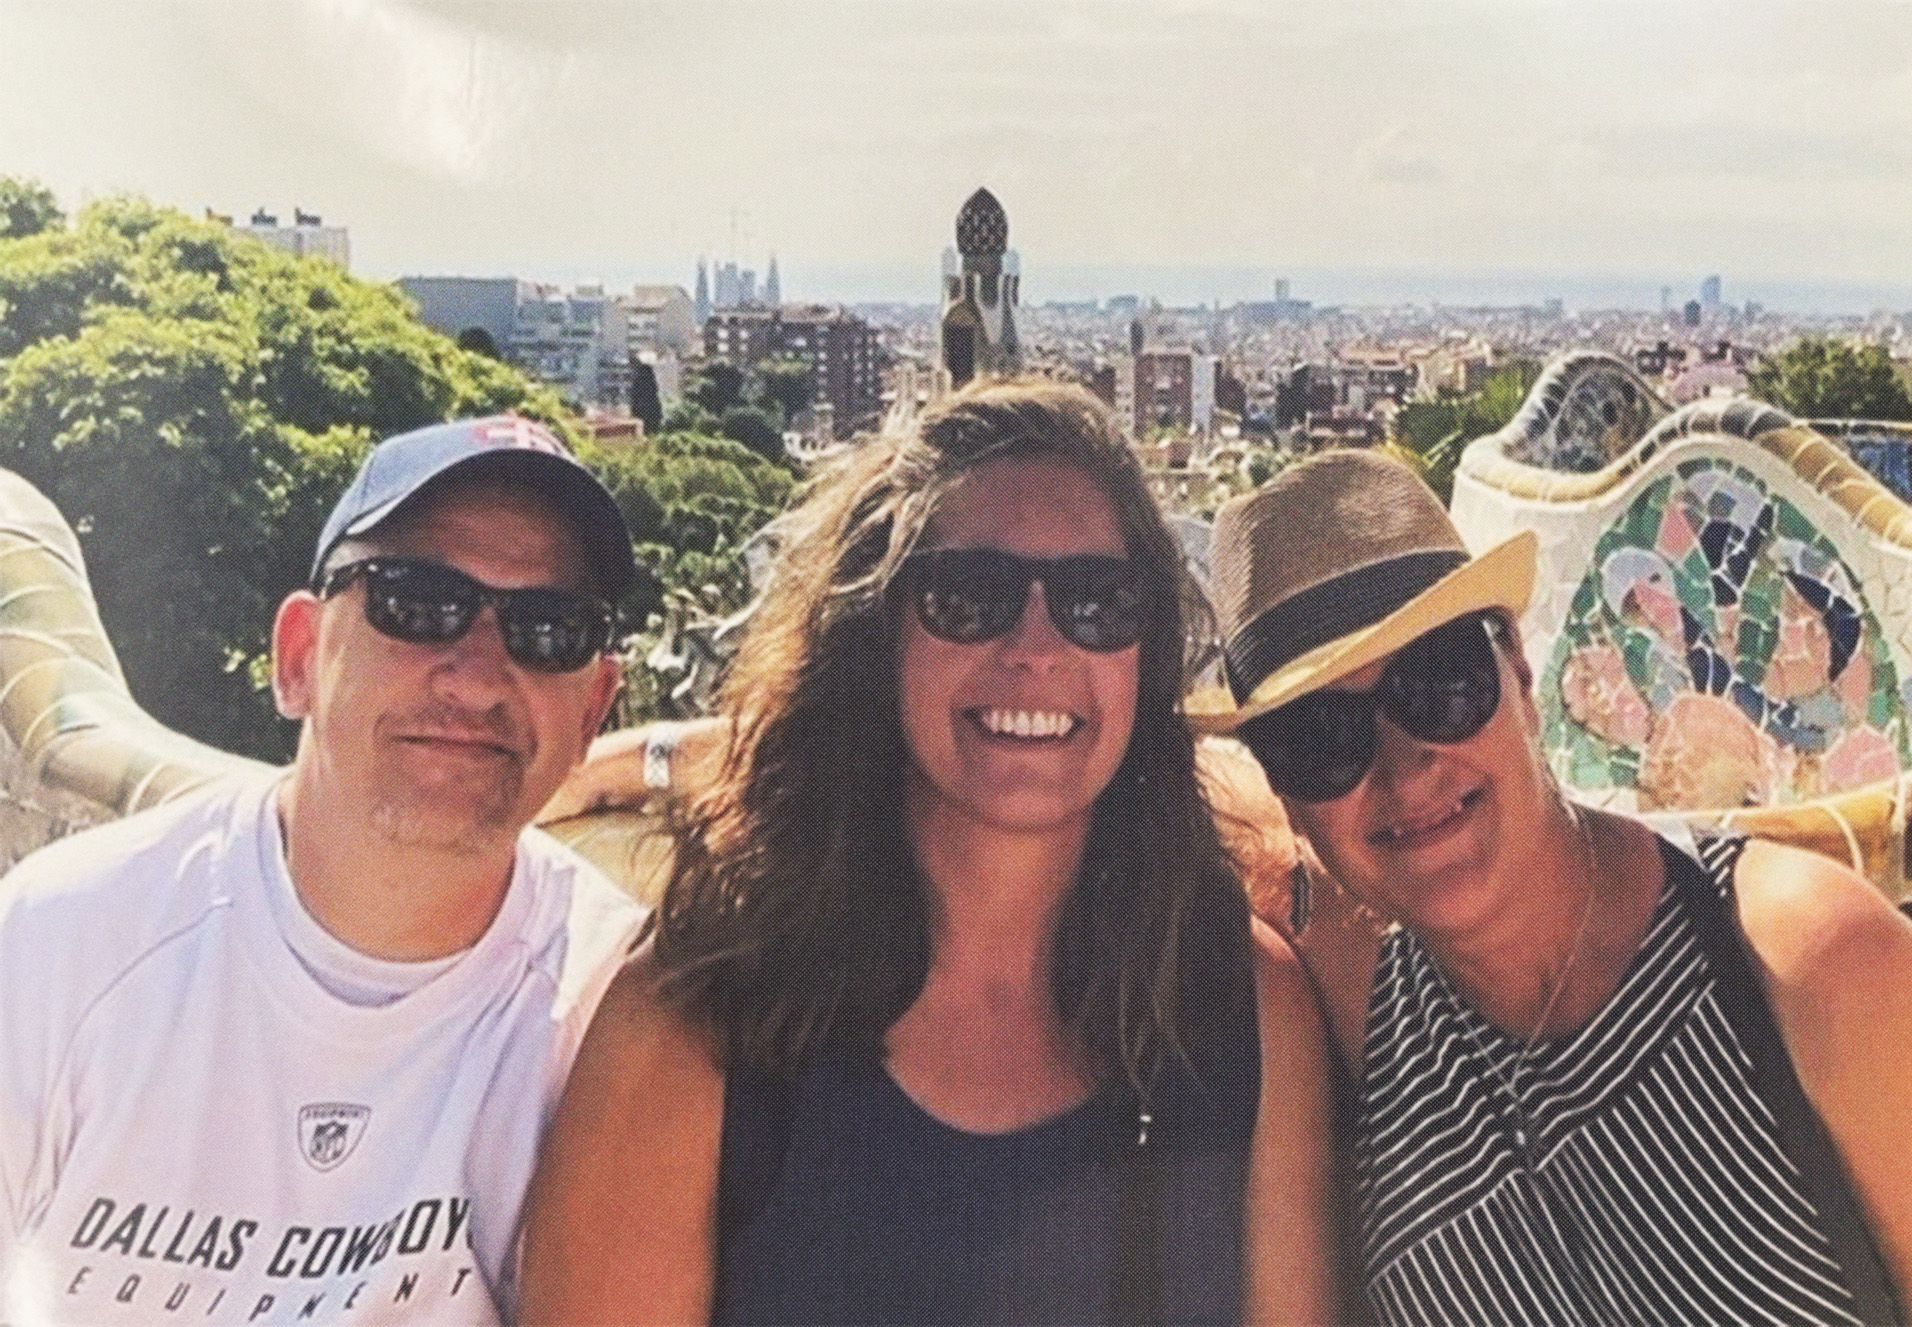 A most memorable teaching moment: Richard and some chaperones posing at Park Guell in Barcelona.